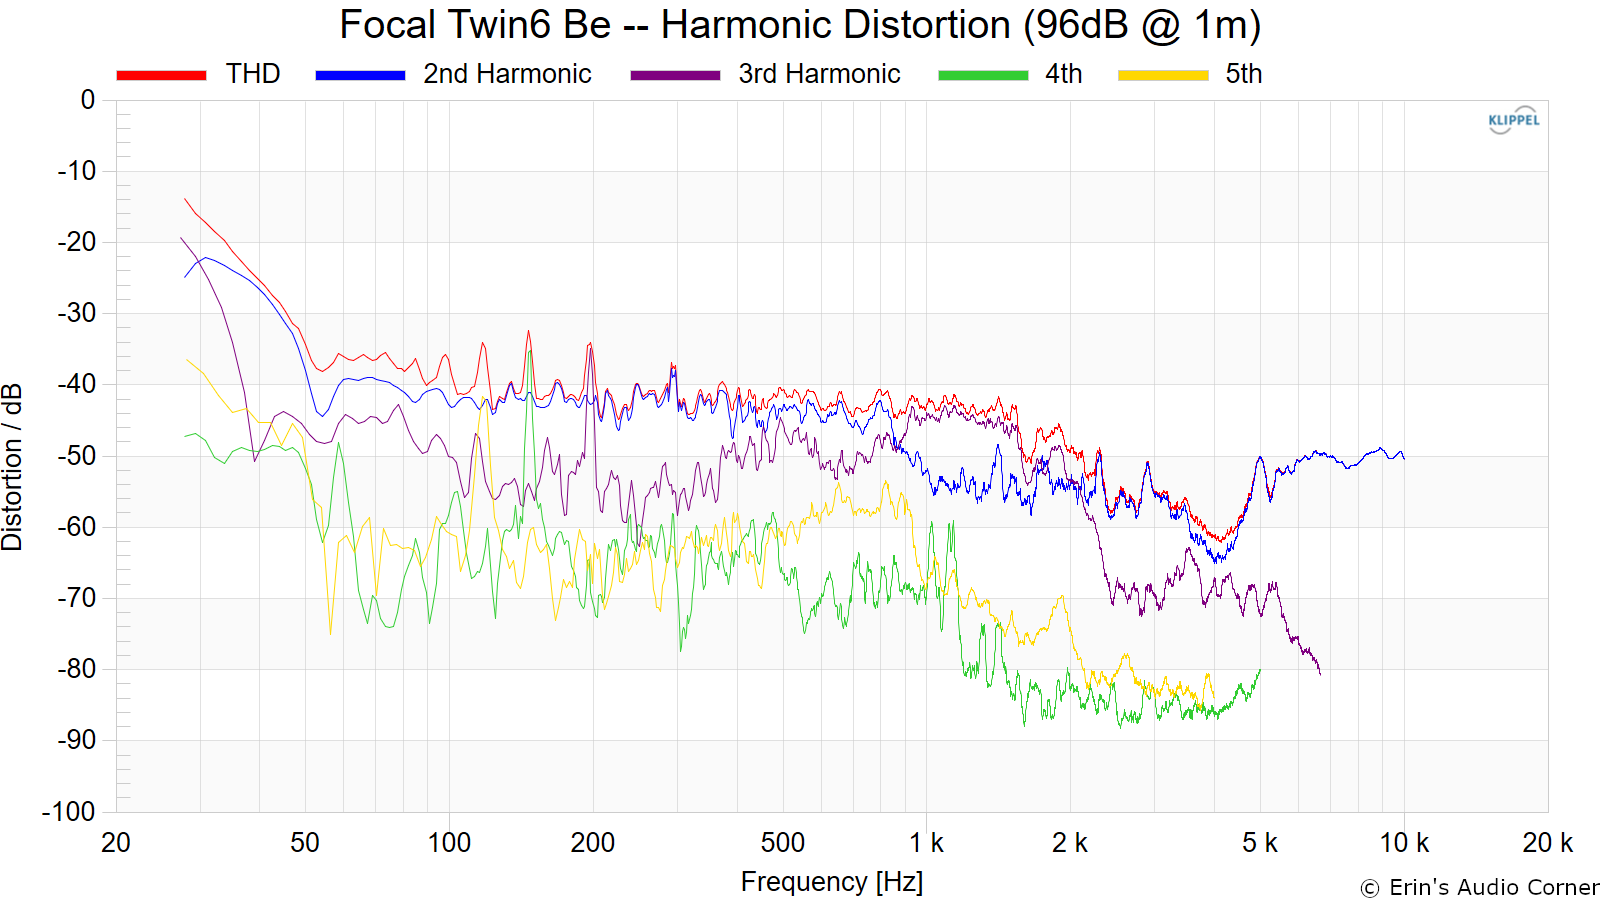 Focal%20Twin6%20Be%20--%20Harmonic%20Distortion%20%2896dB%20%40%201m%29.png